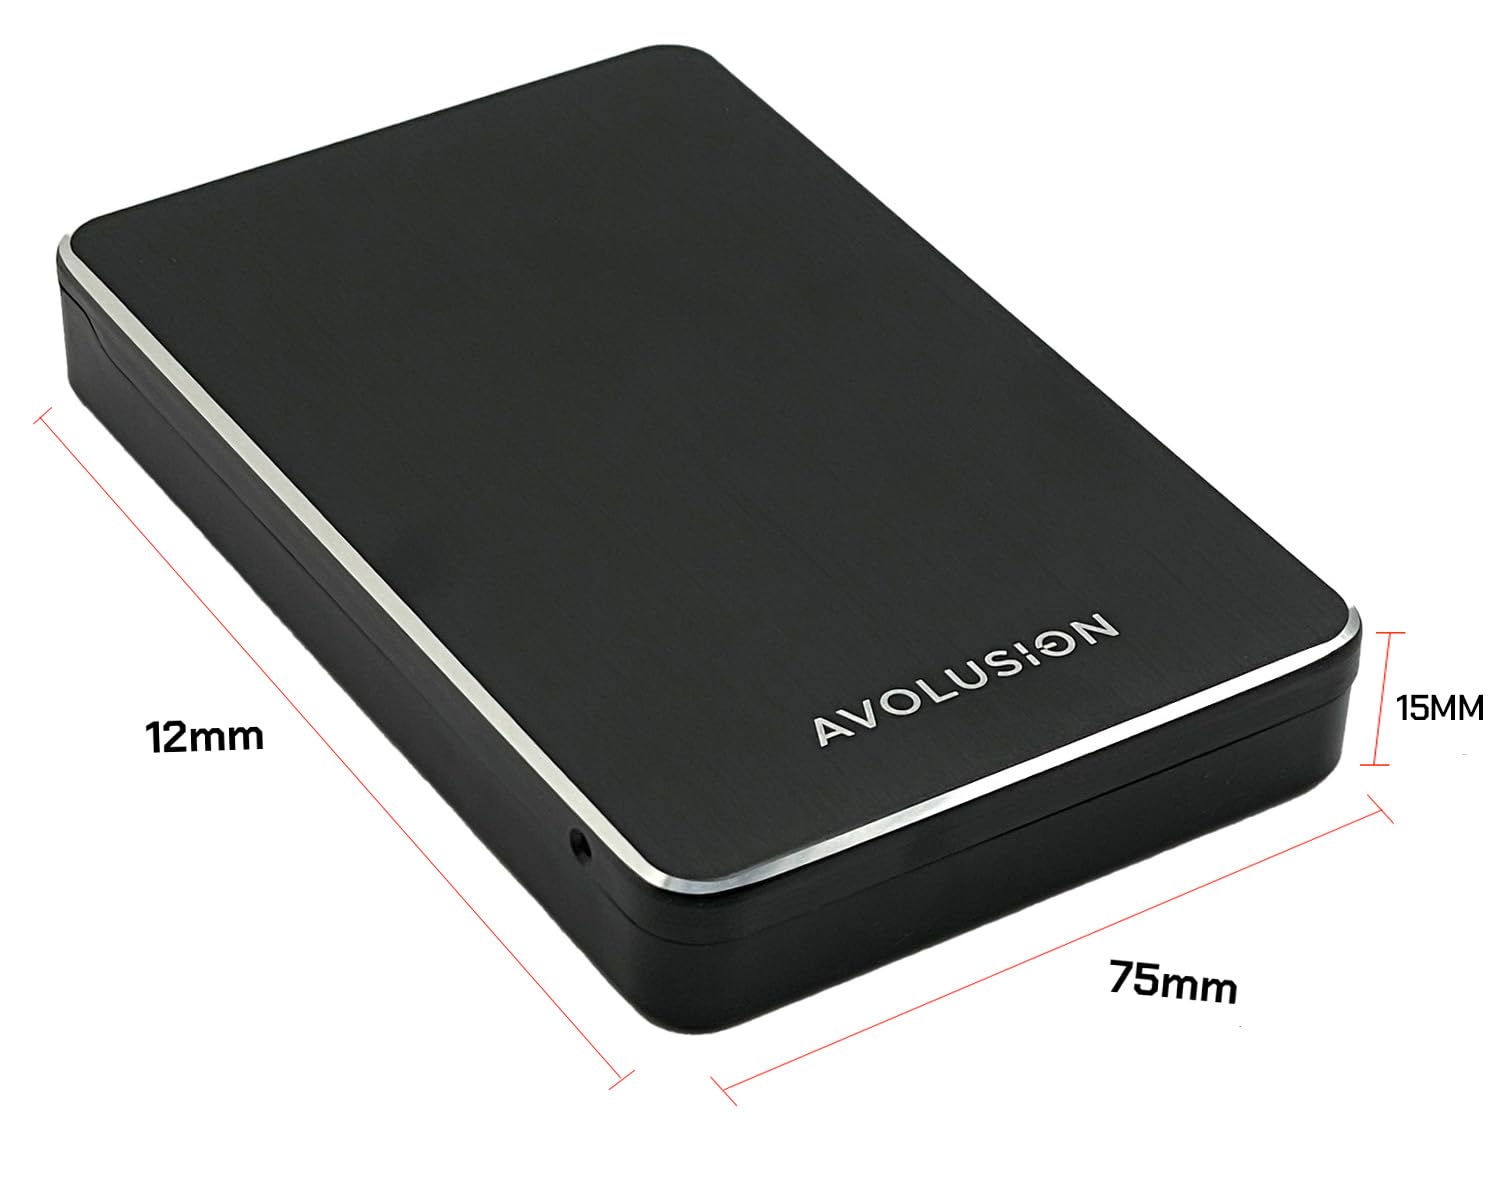 Avoluxion 1TB USB 3.0 Portable External Hard Drive (for PS4 Game Console, Pre-Formatted) - 2 Year Warranty